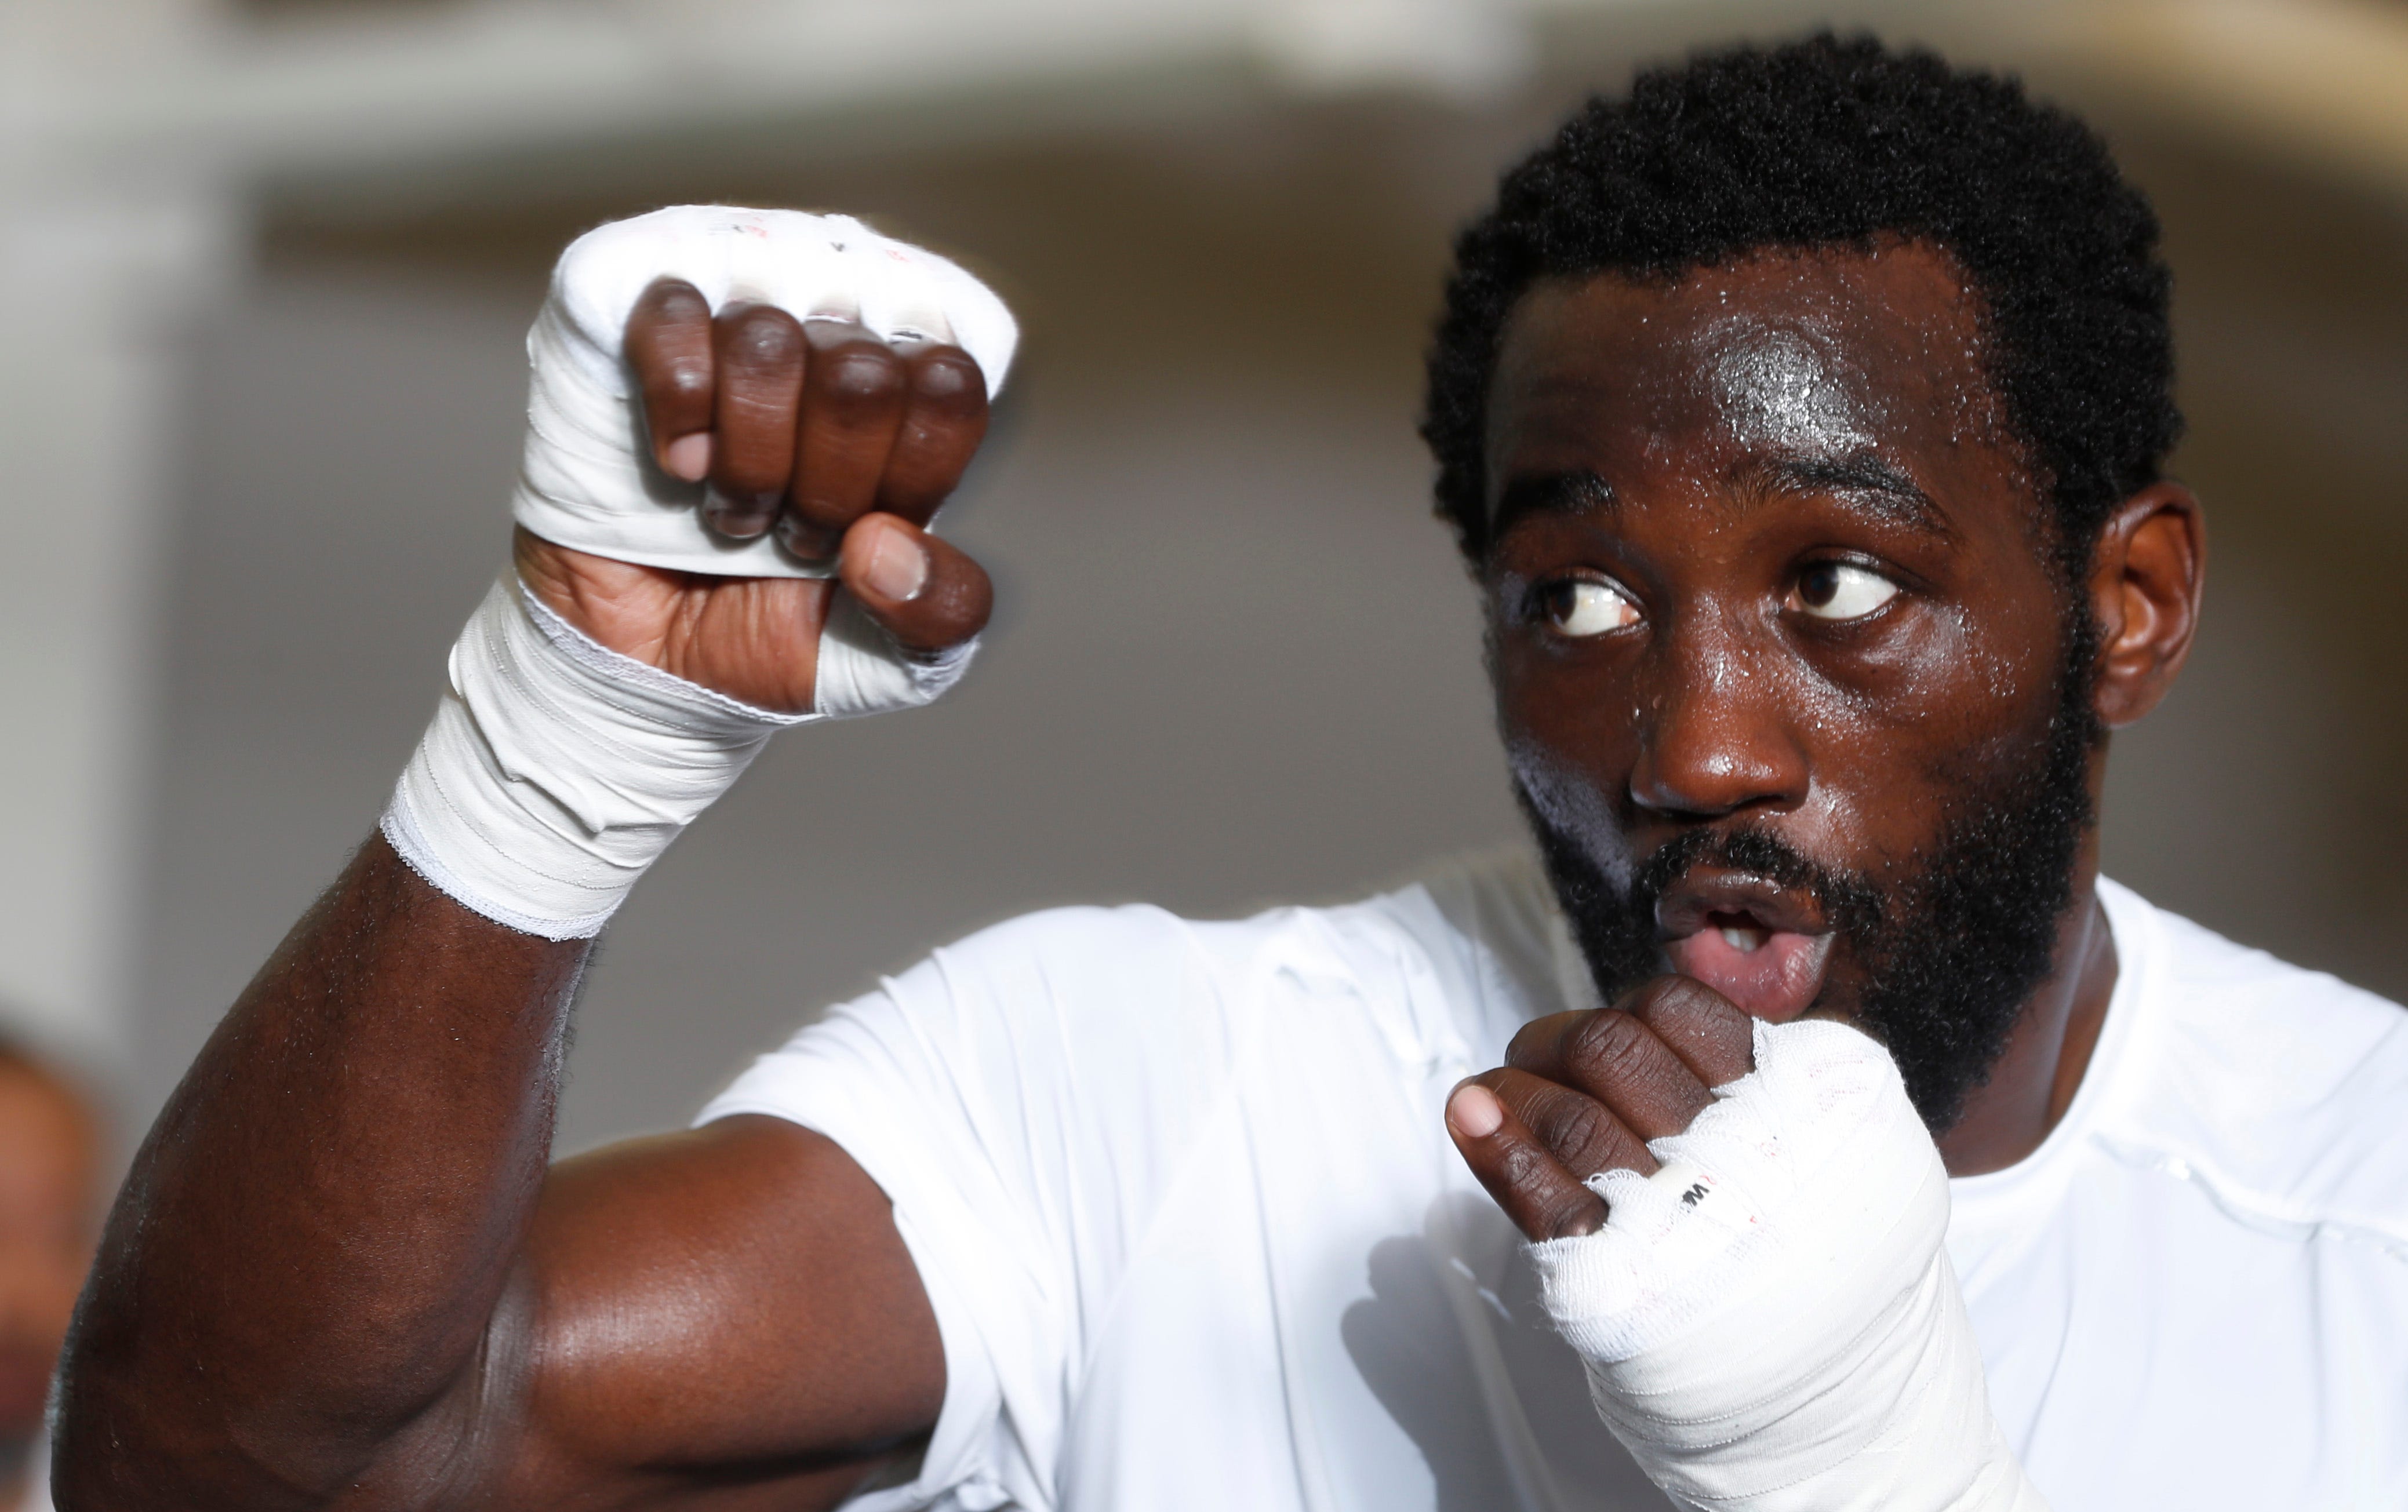 report: terence crawford to challenge 154-pound beltholder israil madrimov in august